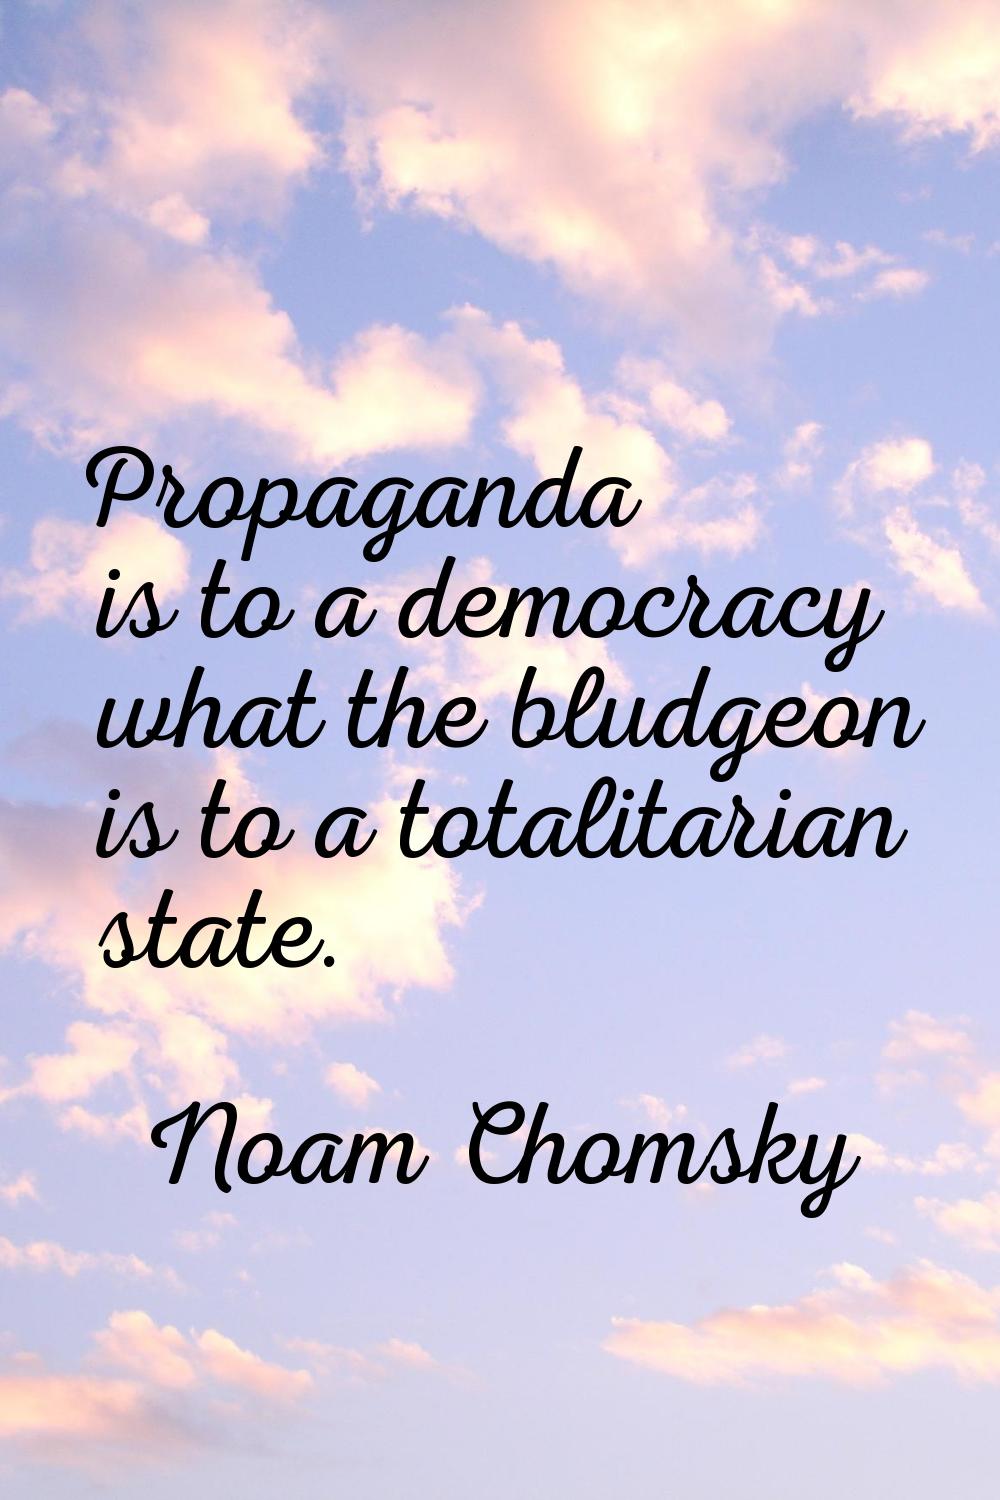 Propaganda is to a democracy what the bludgeon is to a totalitarian state.